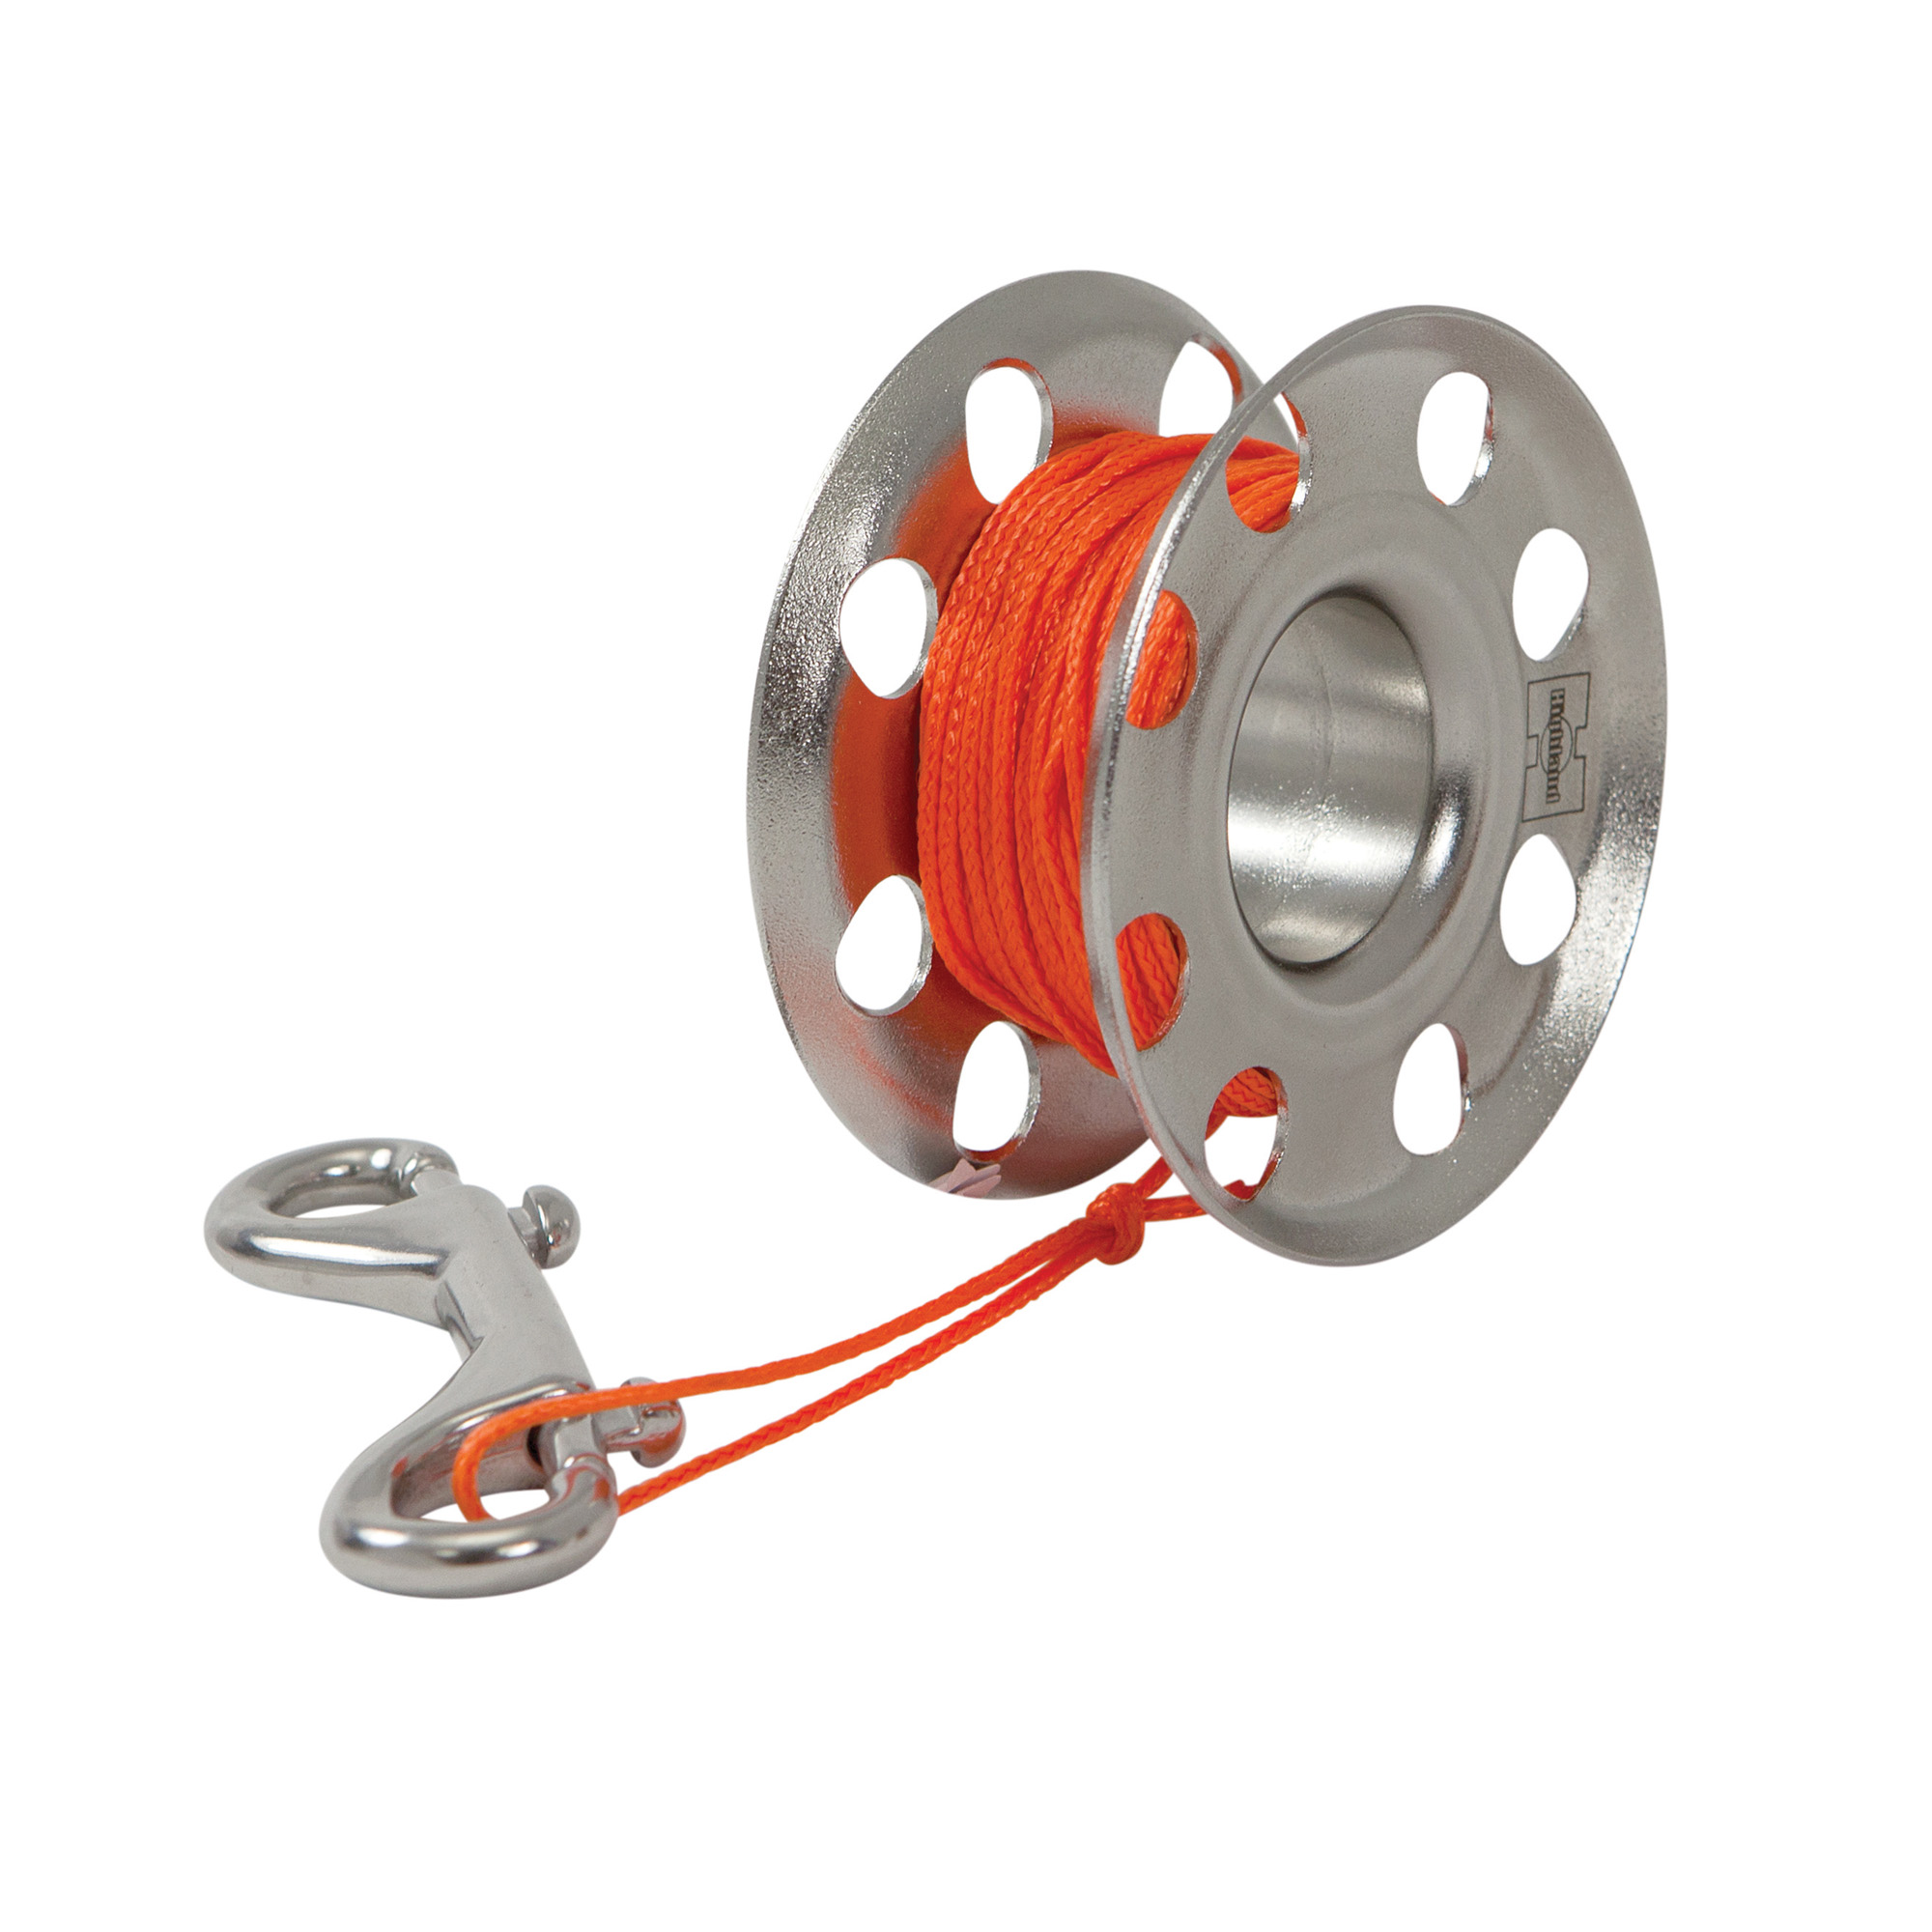 Scuba Diving Reel Line Holder & Stainless Steel Details about   Small Compact Finger Spool 